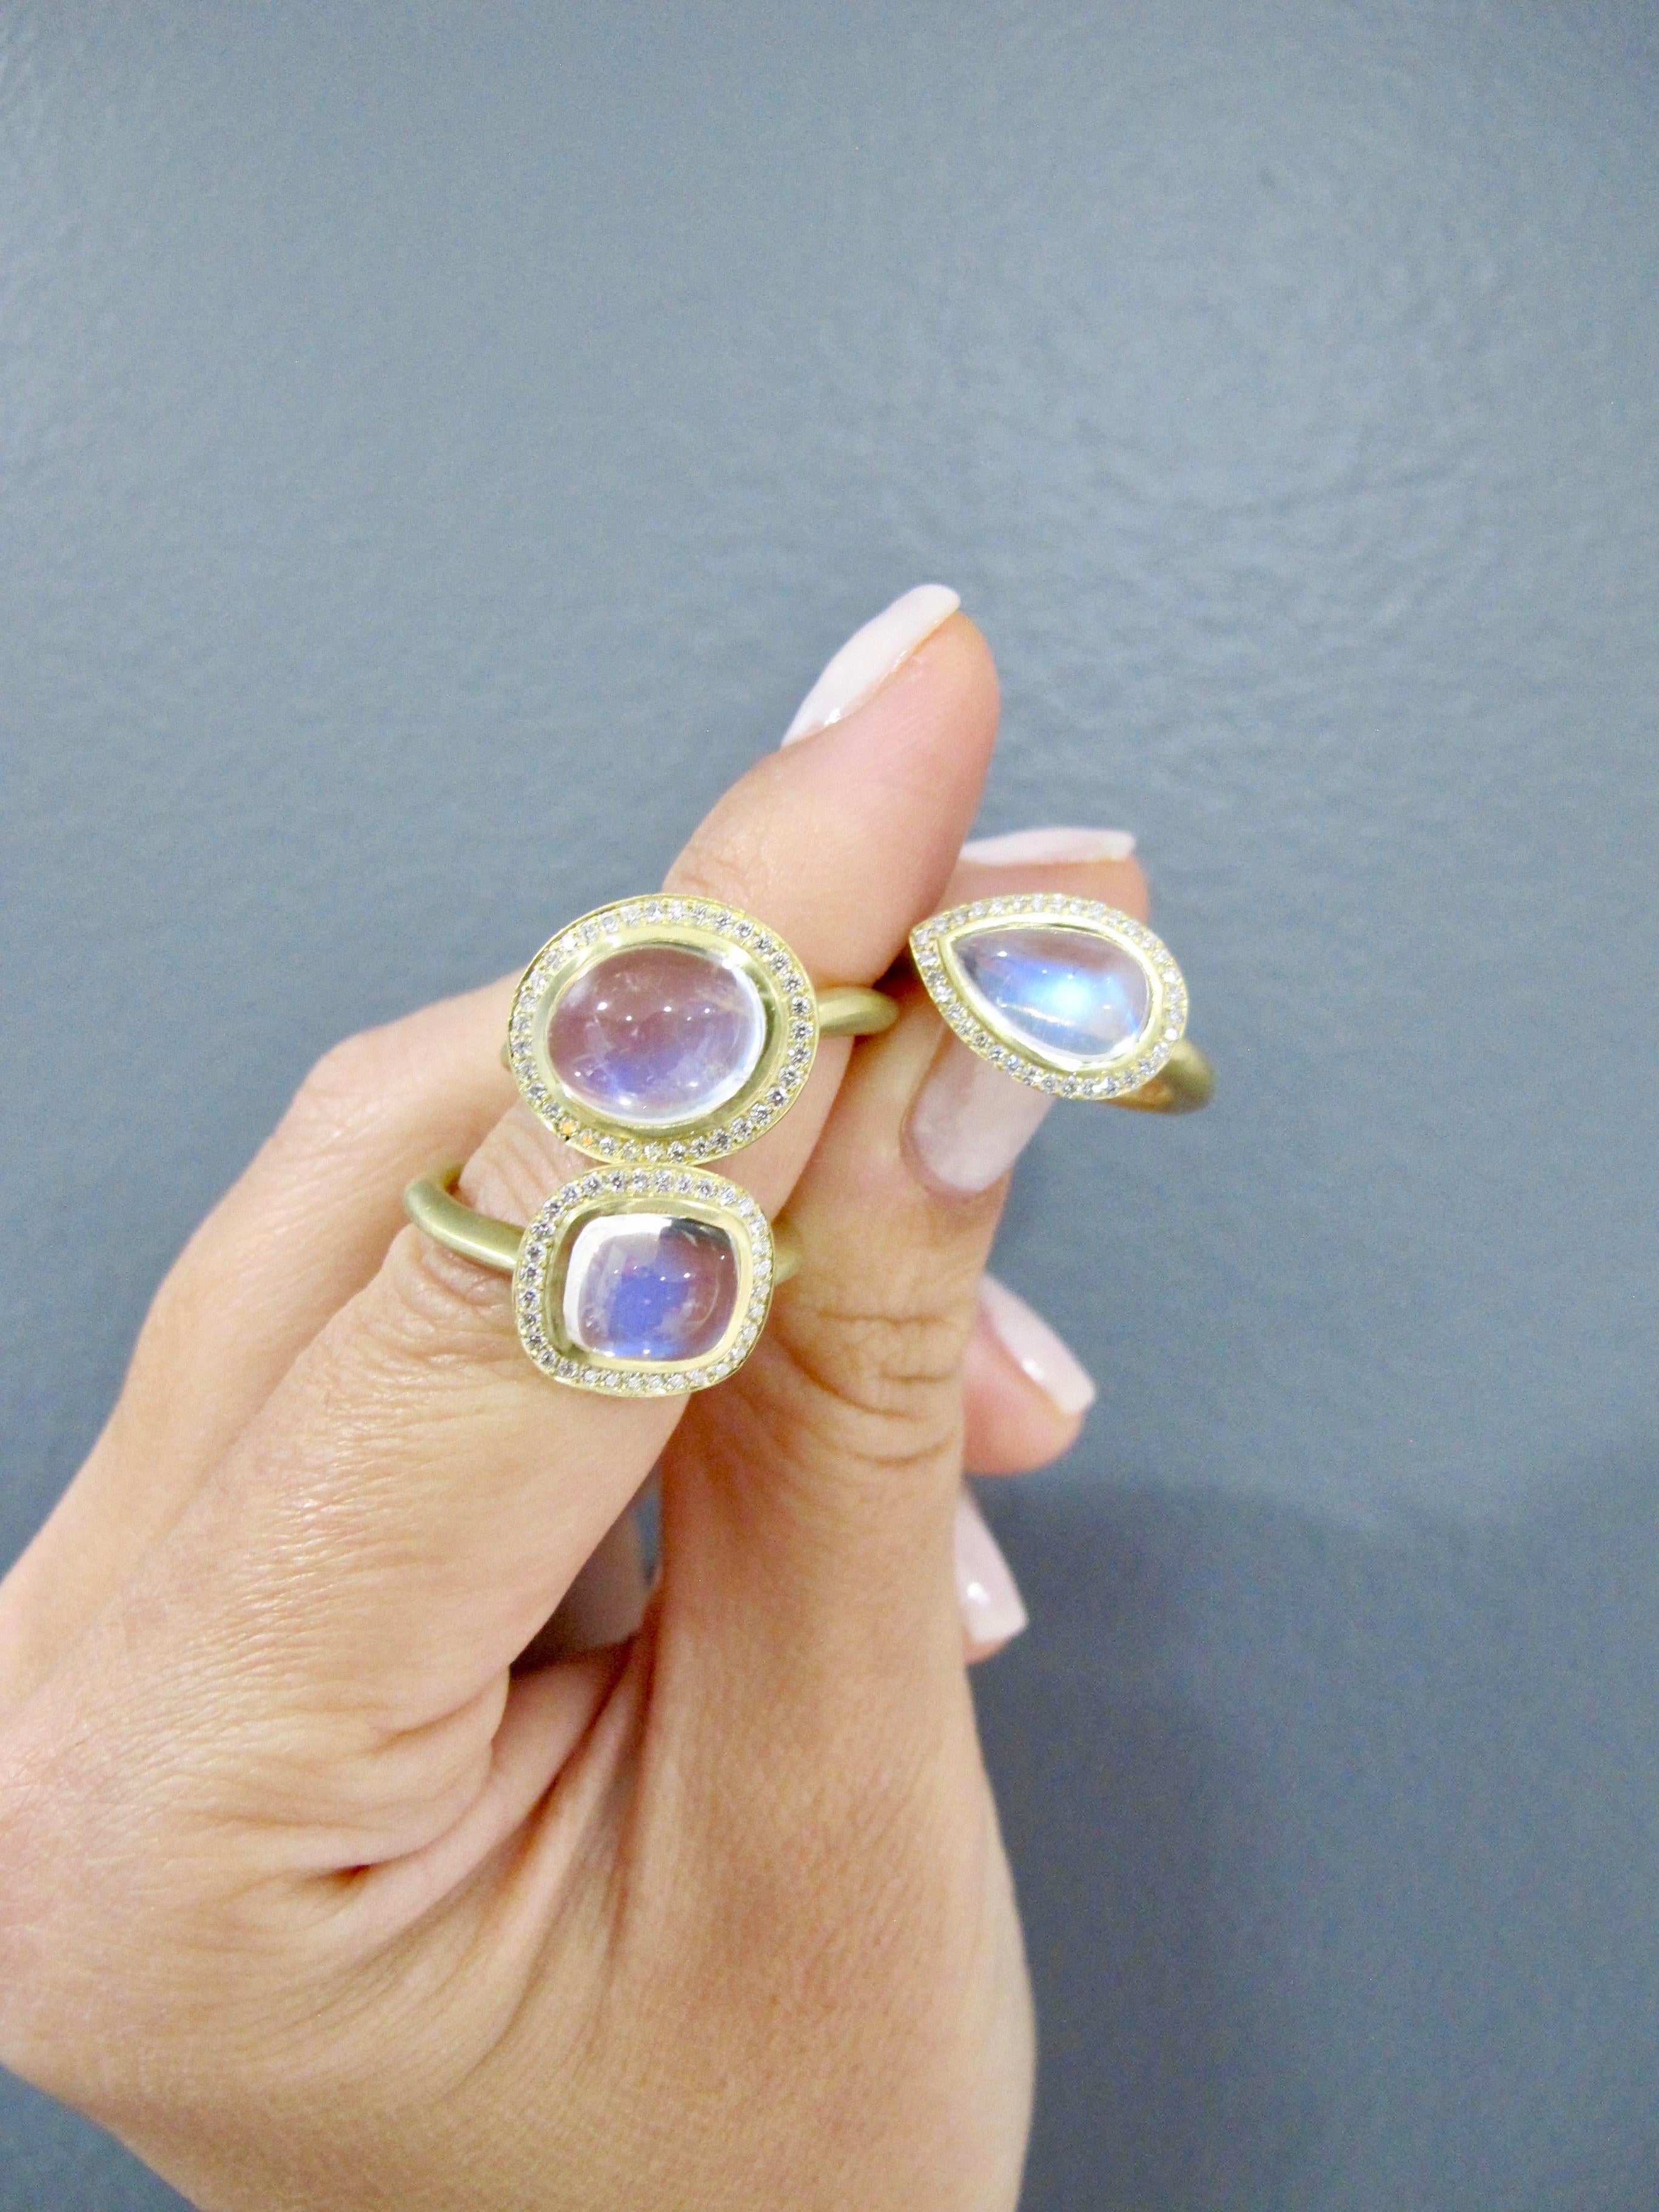 how to clean moonstone ring